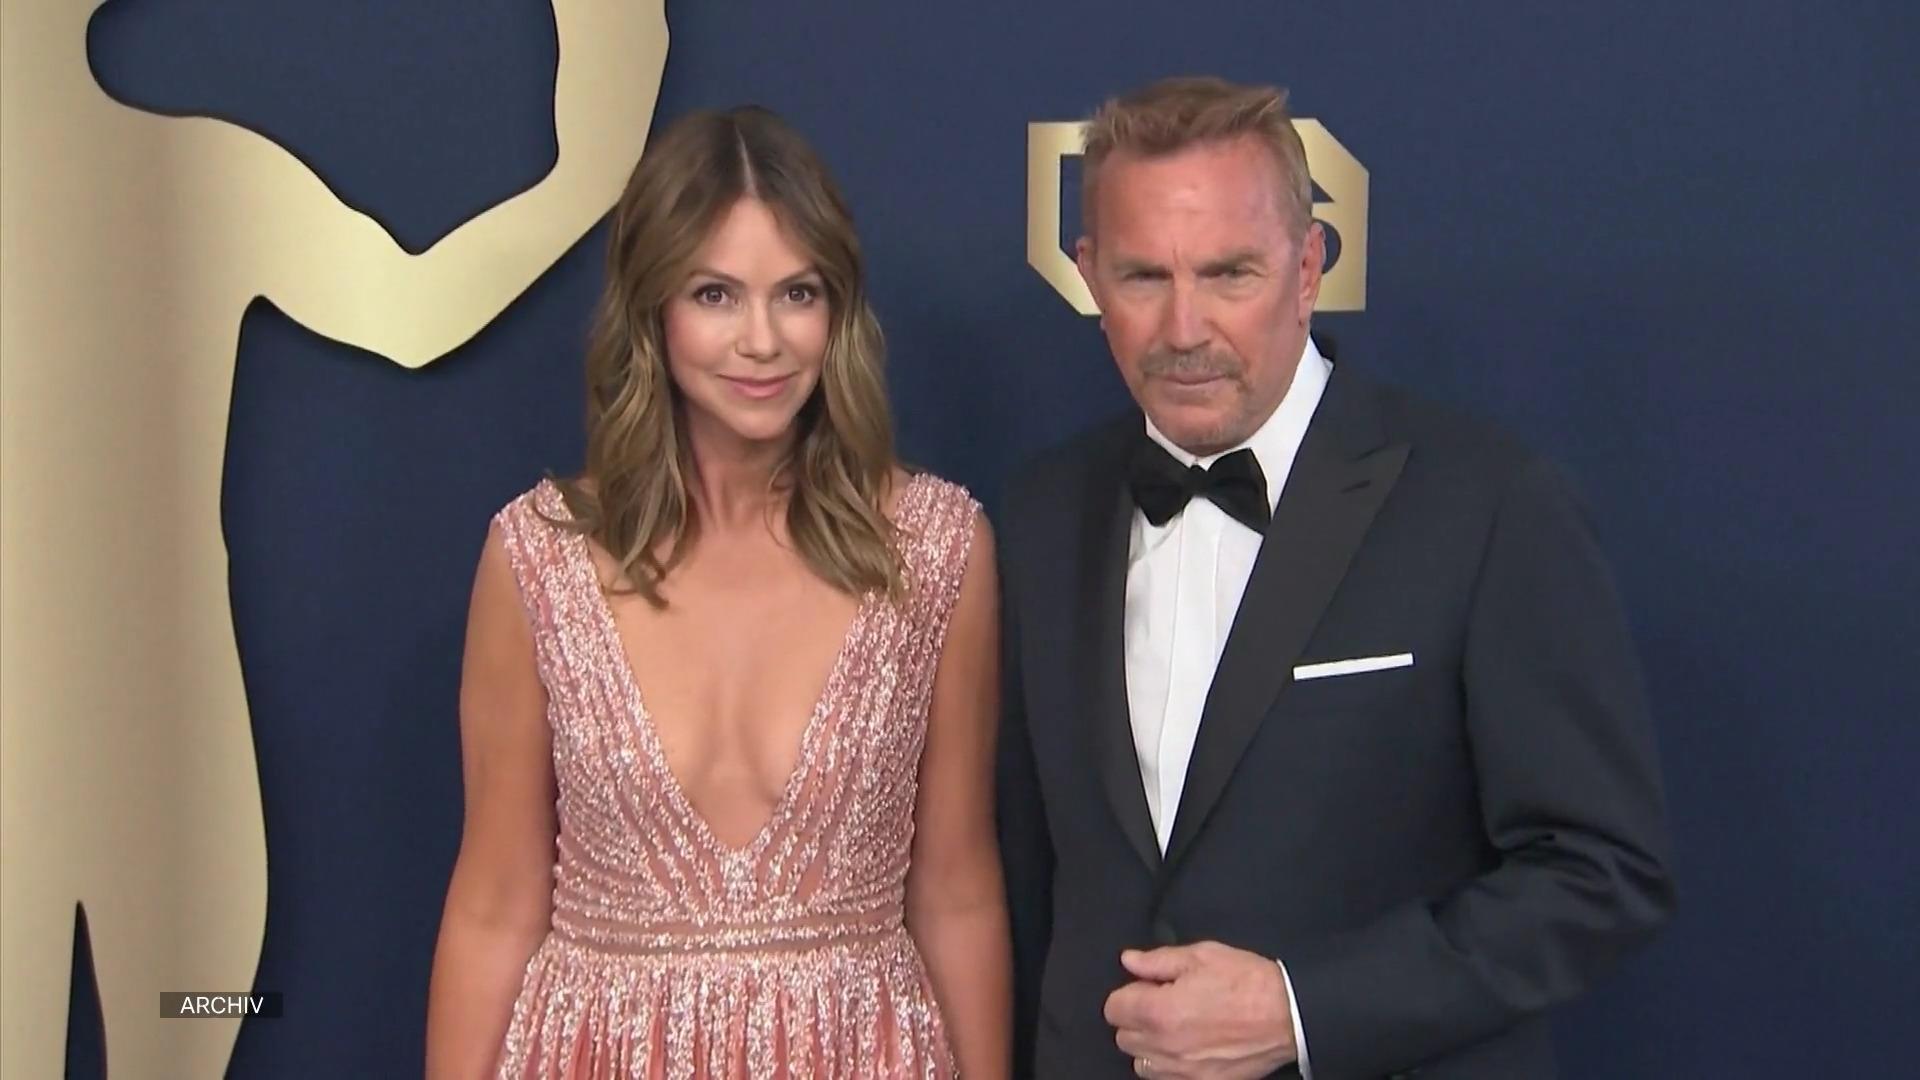 Kevin Costner's wife has to move out of 145 million mansion